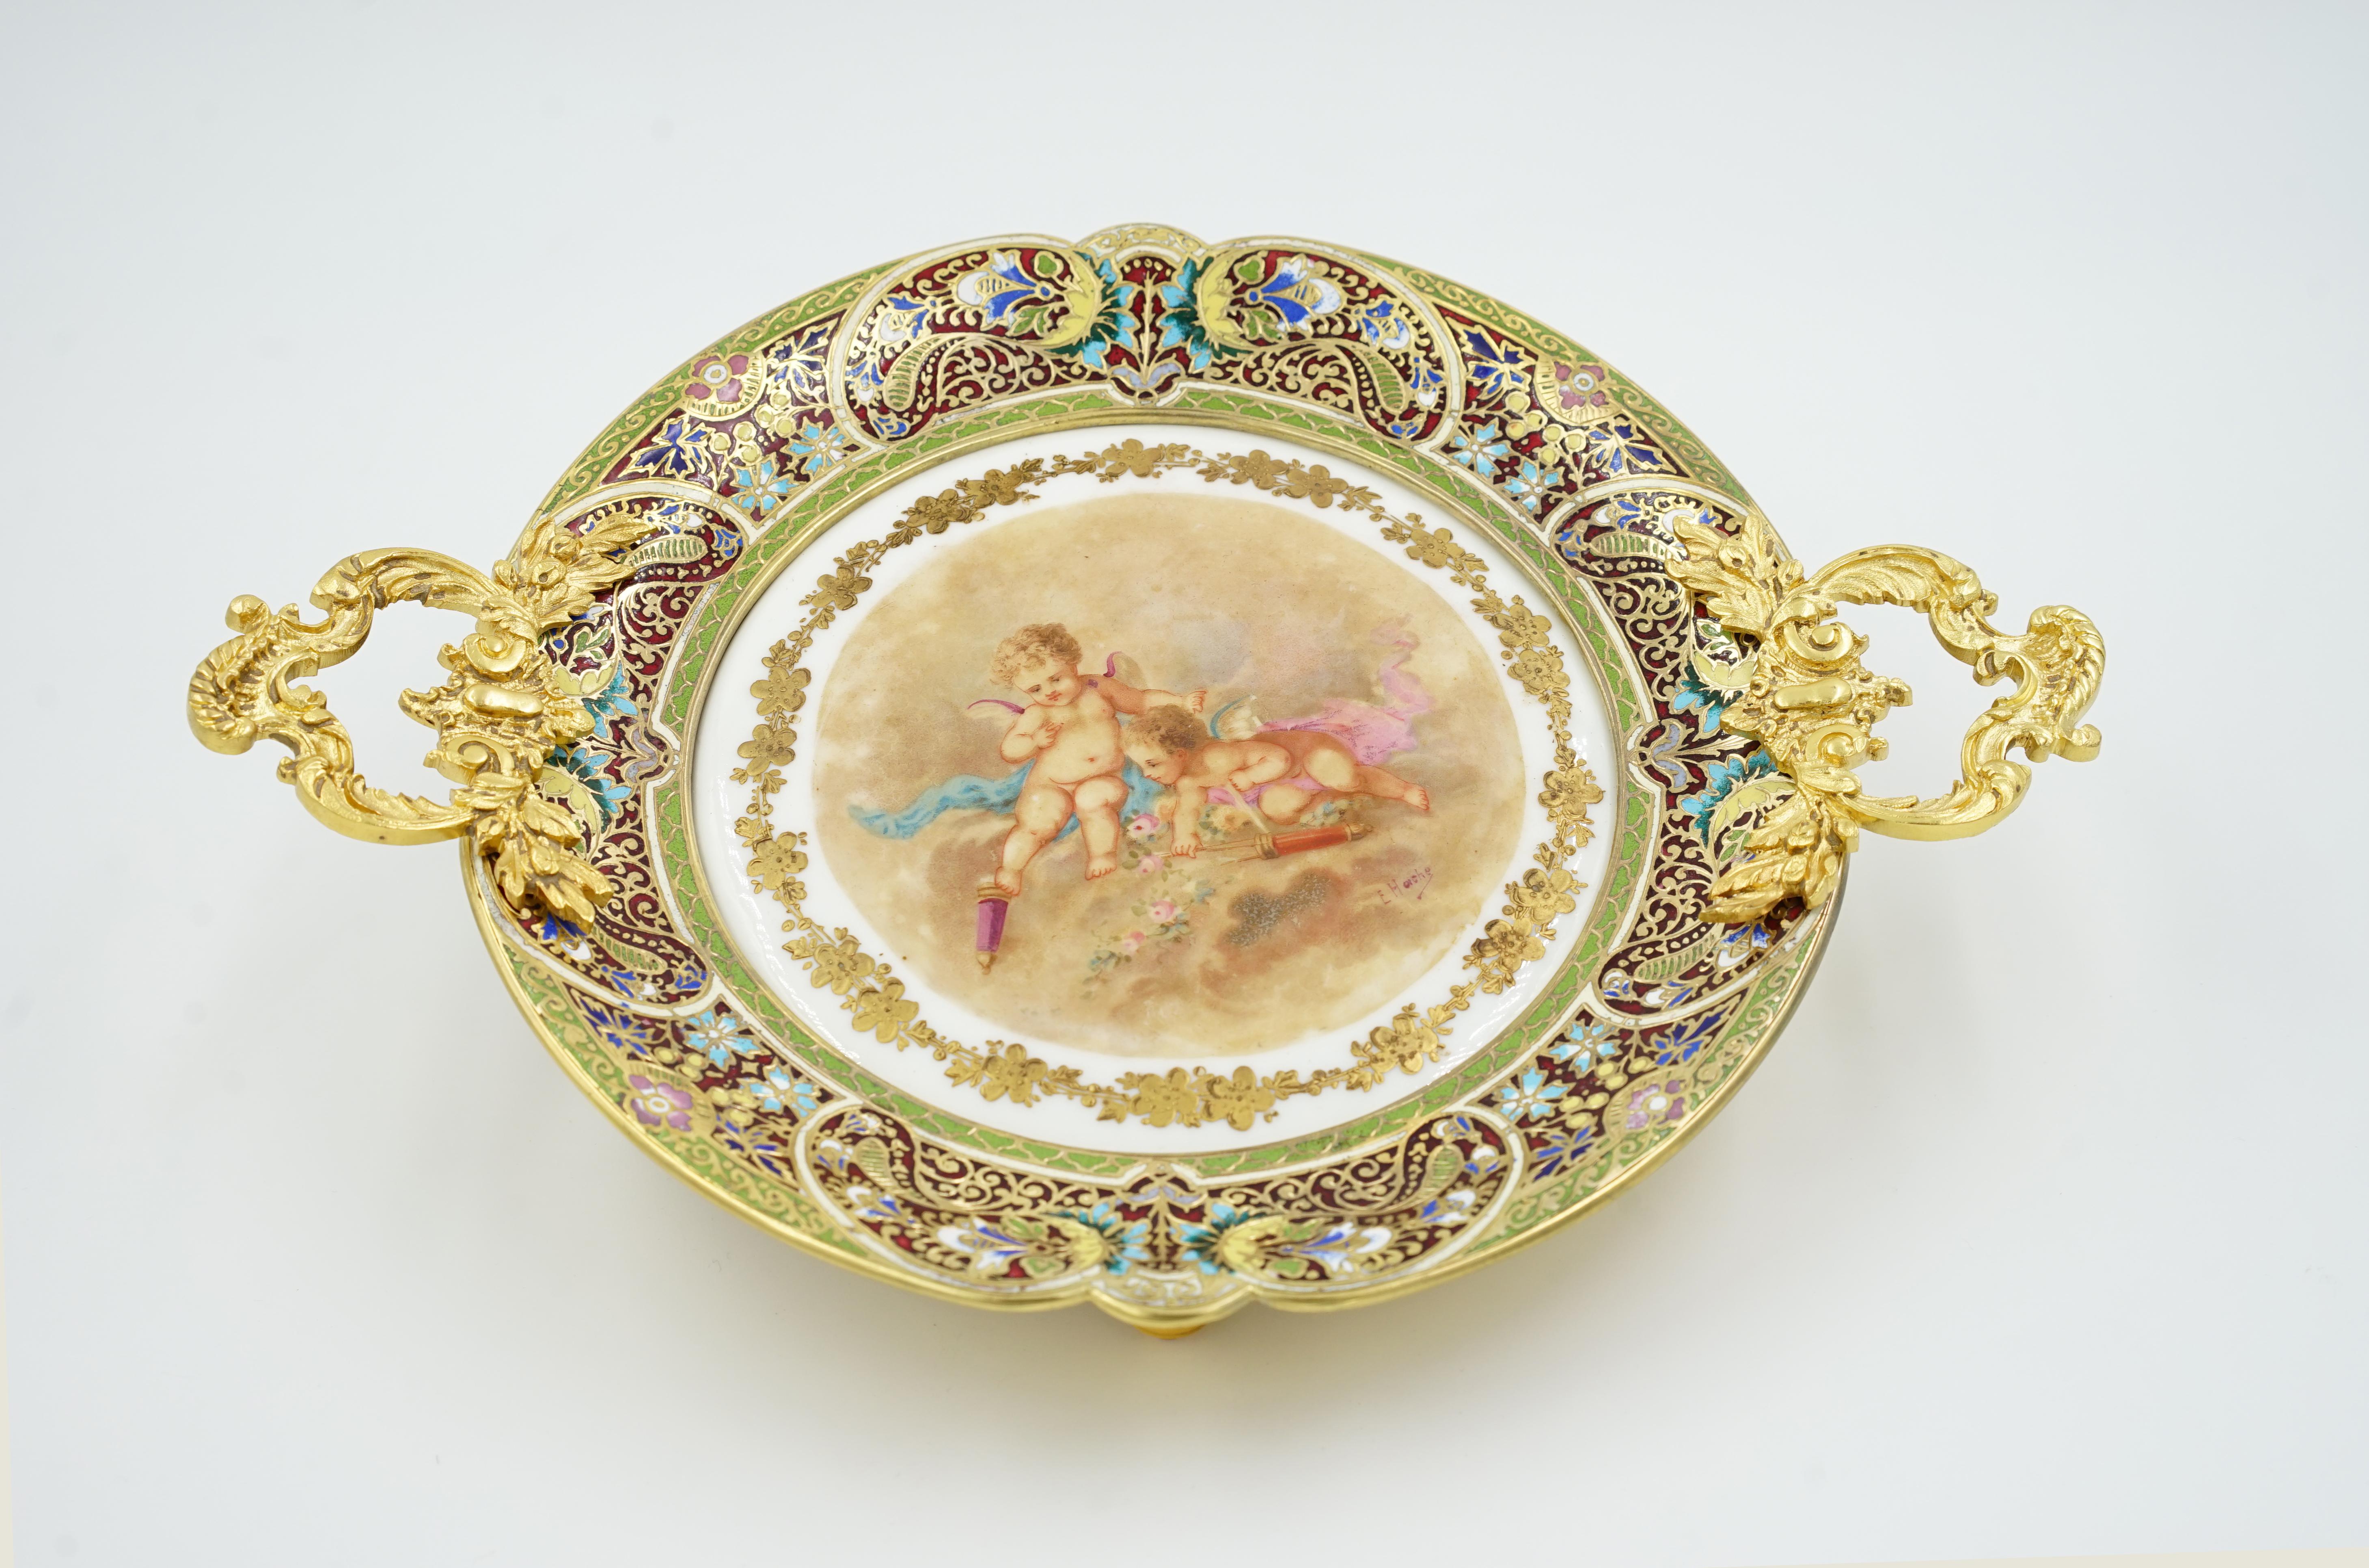 Napoleon III card holder
(card fray)
Gilt bronze and enamel
Origin France Circa 1900
Gilt bronze and Cloissone enamel with hand-painted Sevres porcelain plate signed by E. Horche
Perfect condition
Napoleon IIII style
The Second Empire style (from